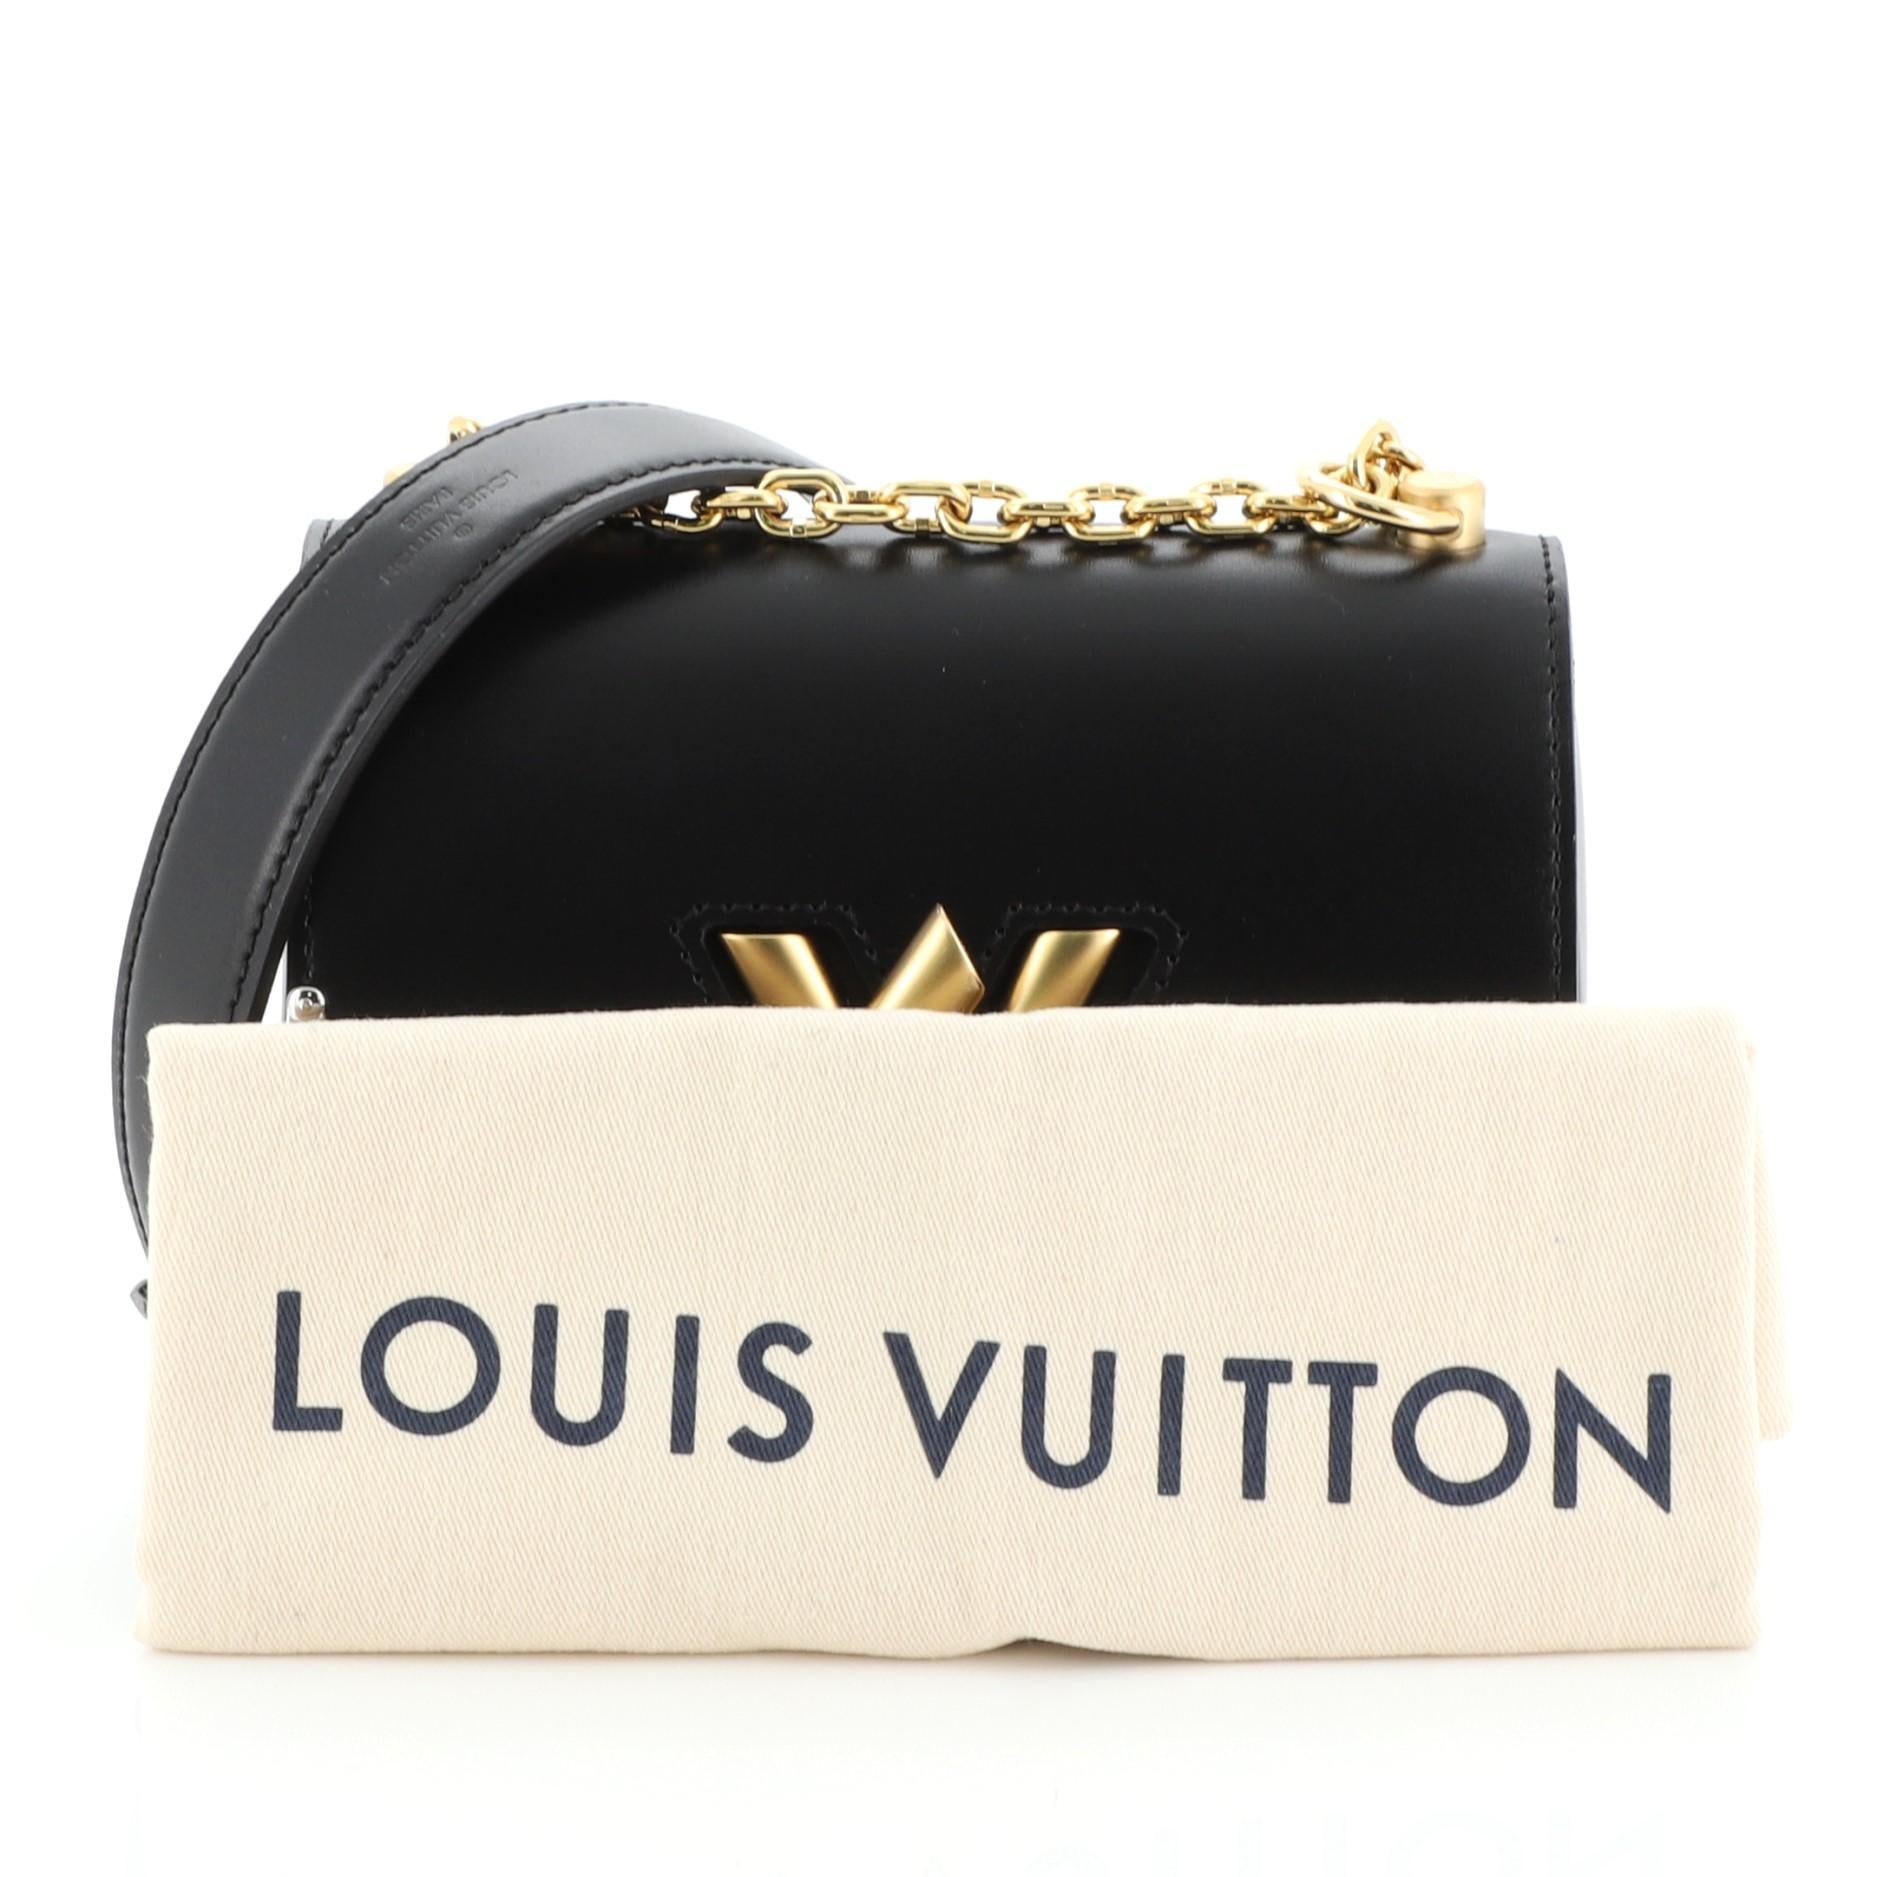 This Louis Vuitton Twist Handbag Embellished Calfskin PM, crafted from black embellished calfskin leather, features chain link strap with leather pad, frontal flap, and matte gold-tone hardware. Its LV twist lock closure opens to a black microfiber